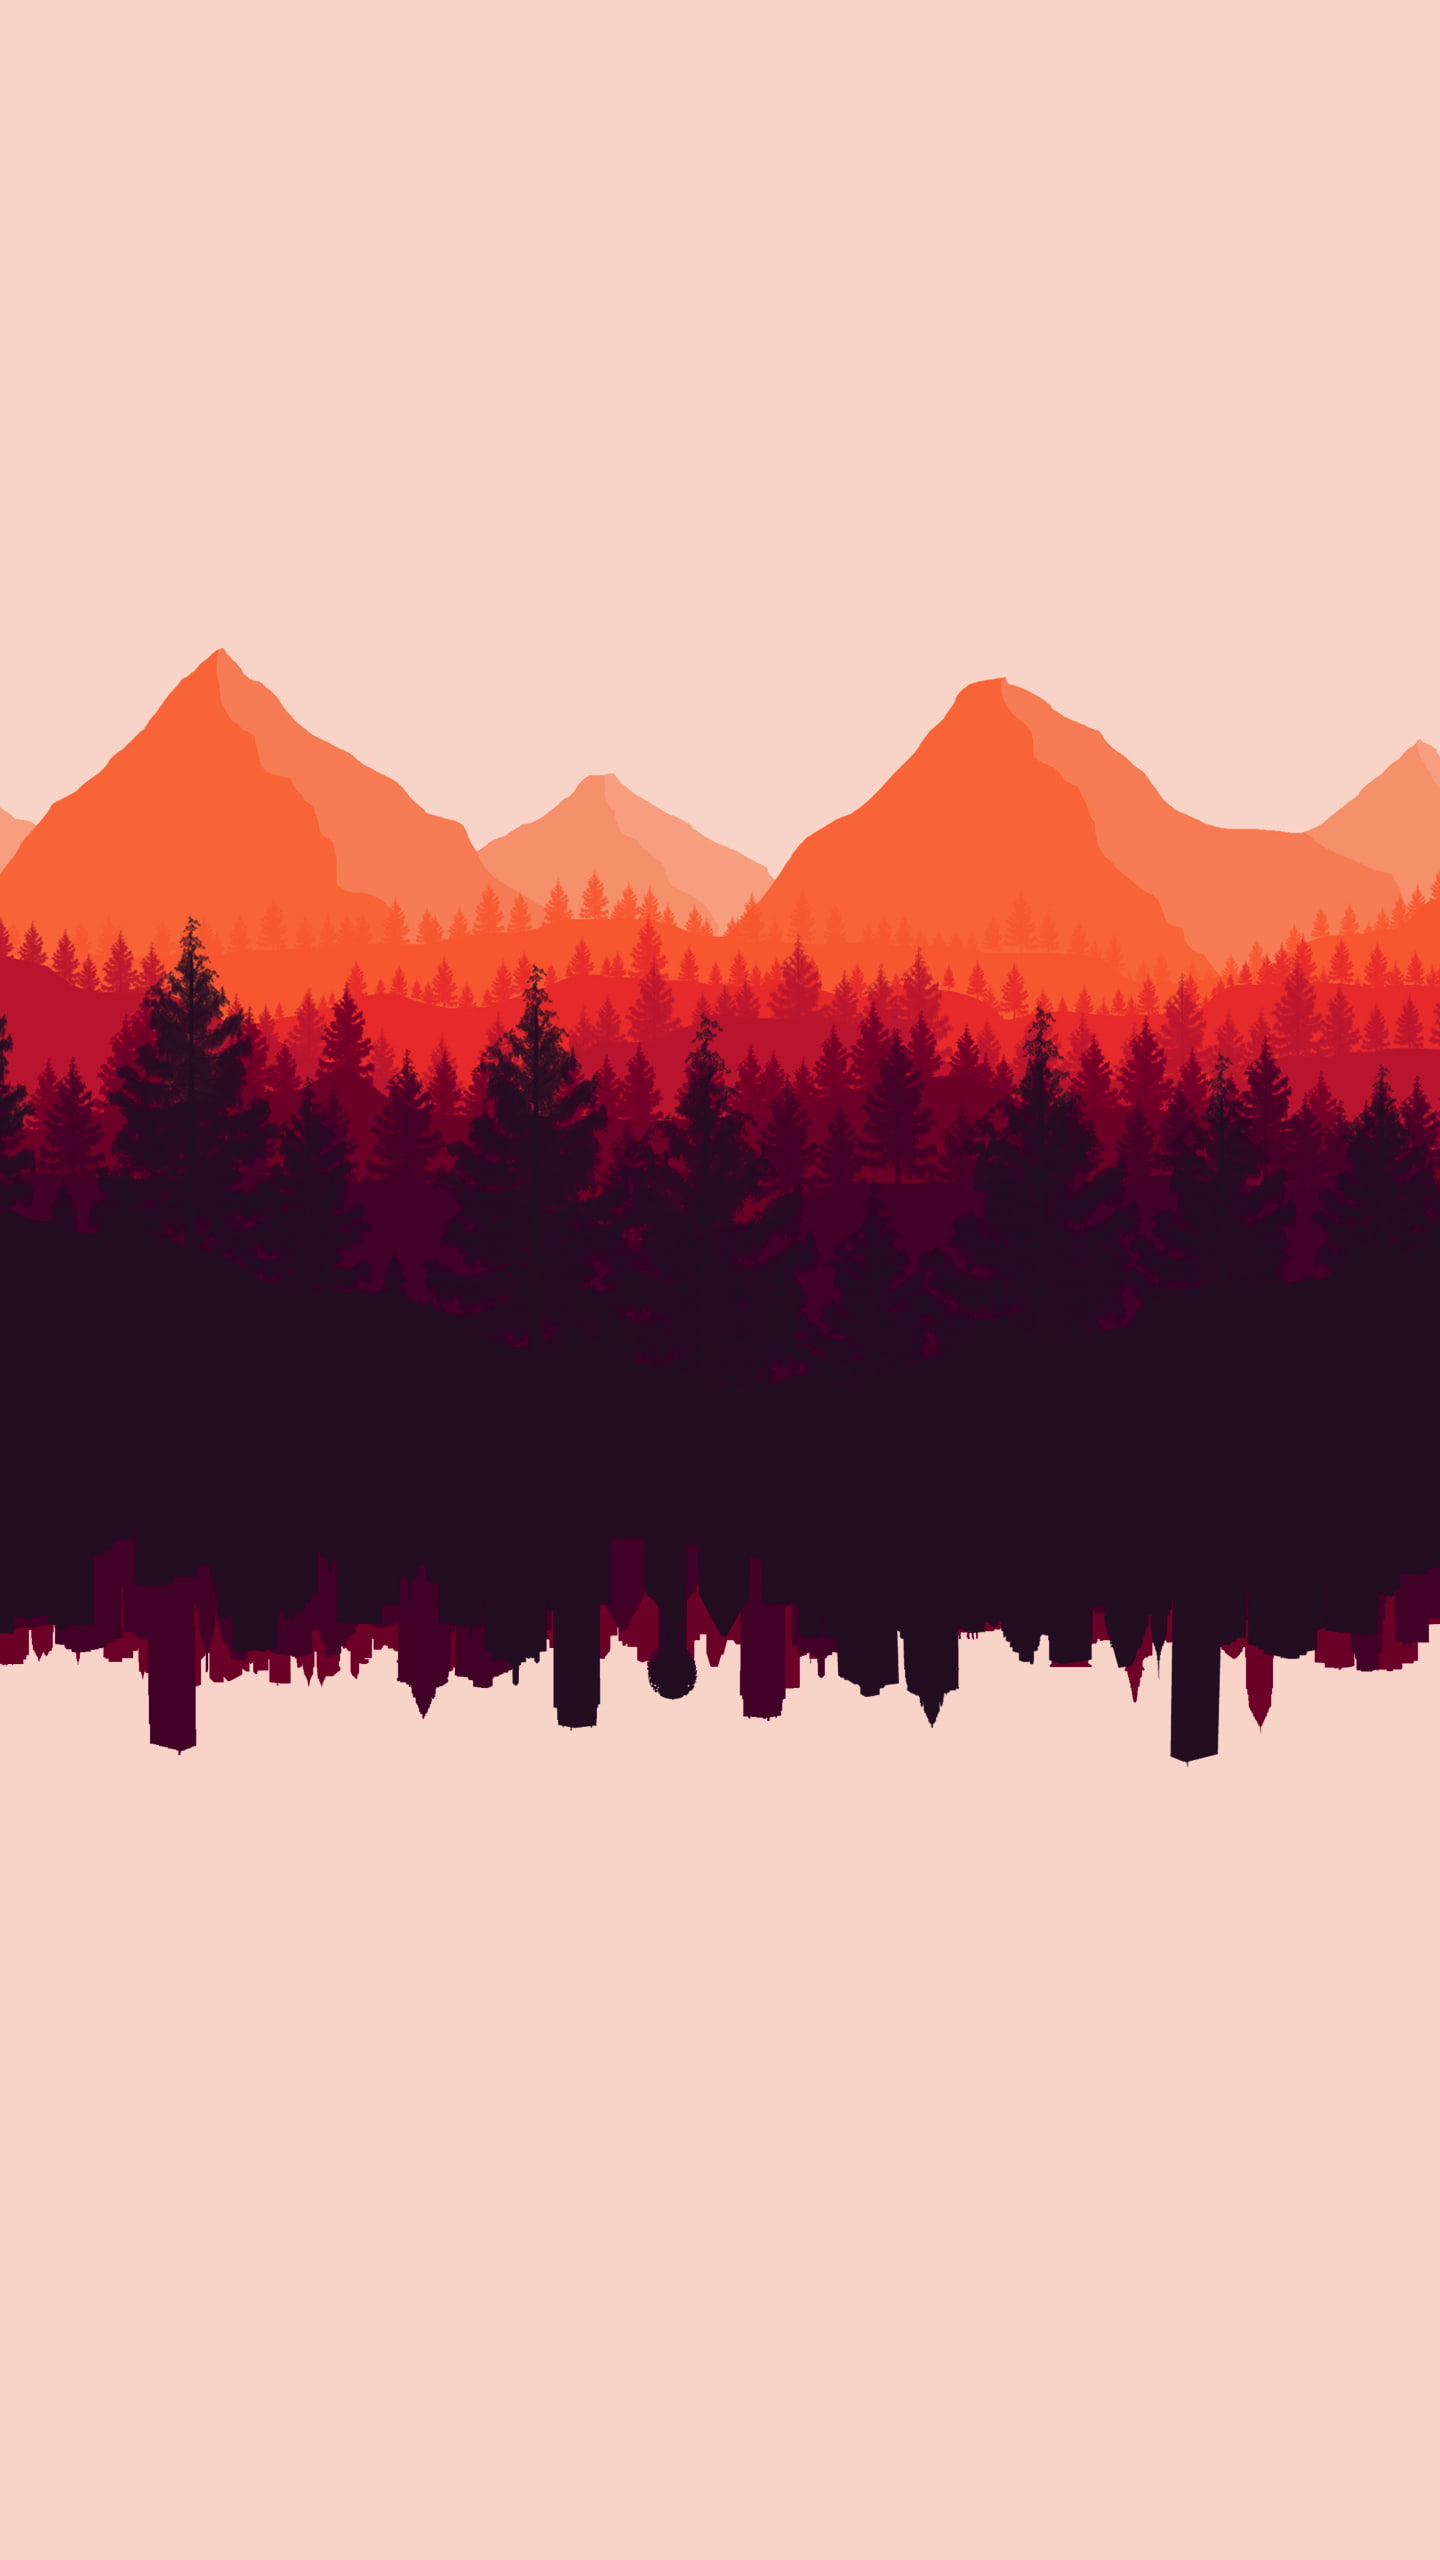 cityscape, mountains, forest, digital art, upside down, trees